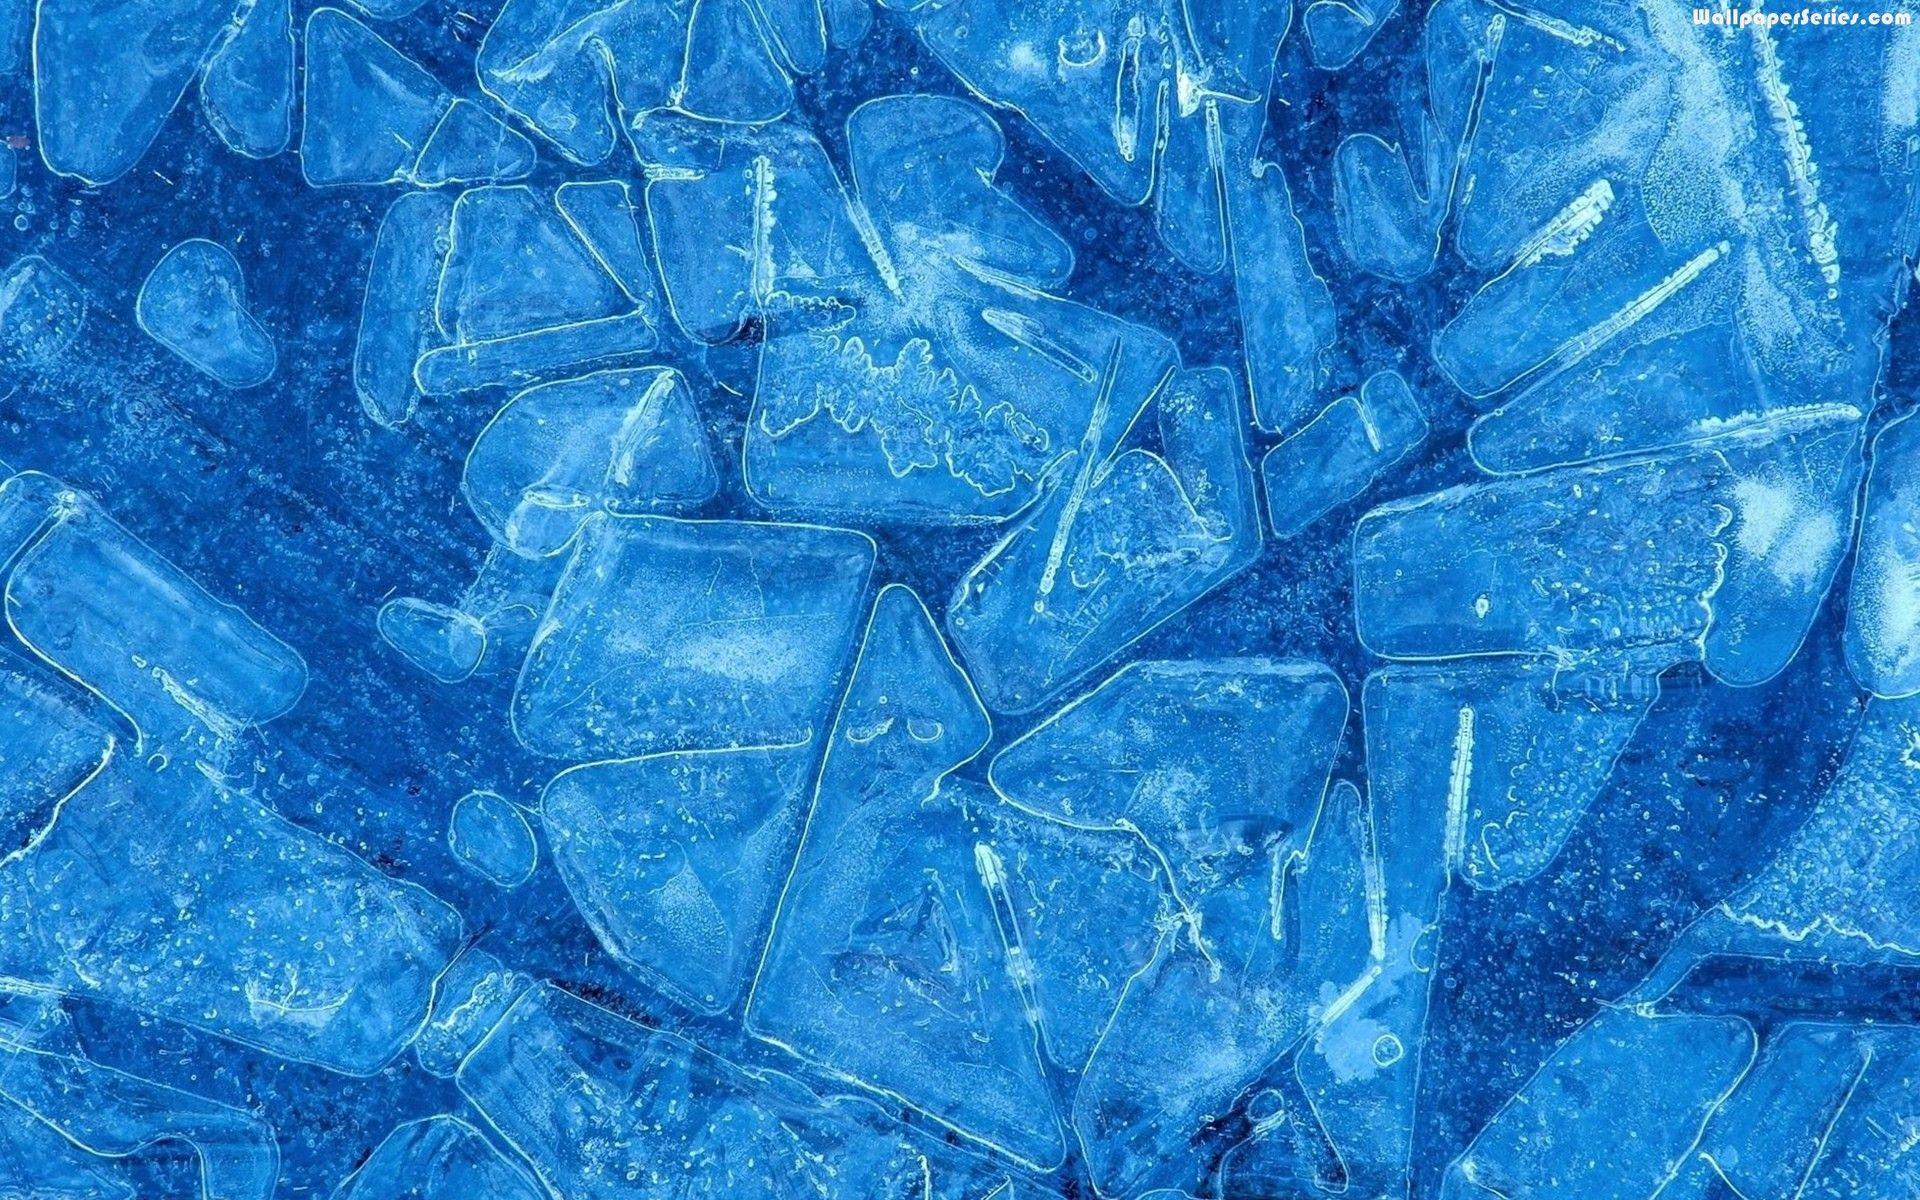 Blue Ice Wallpapers - Wallpaper Cave